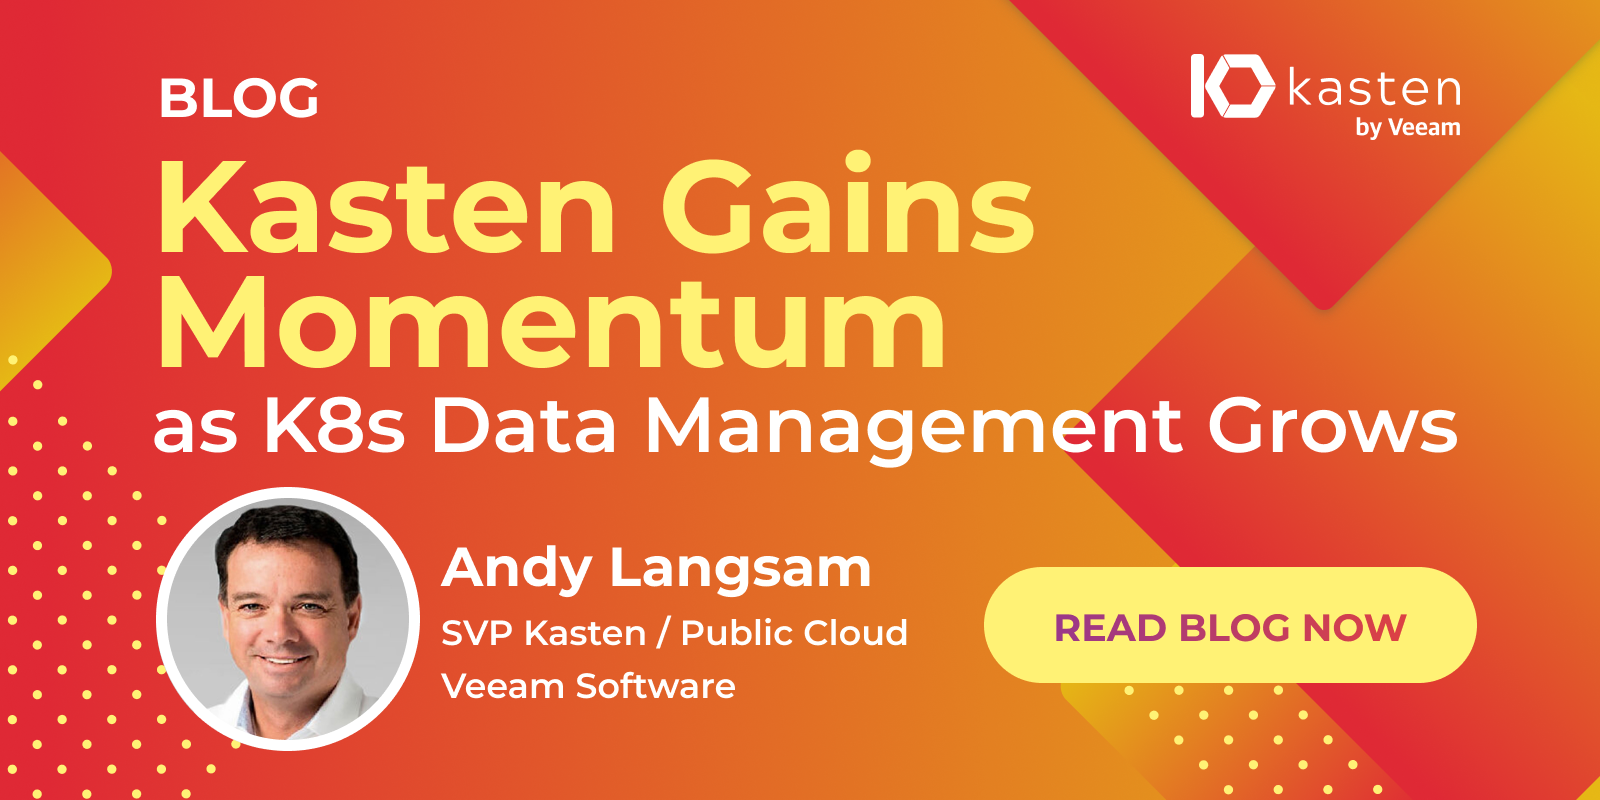 Kasten Gains Momentum as Demand for Reliable K8s Data Management Grows